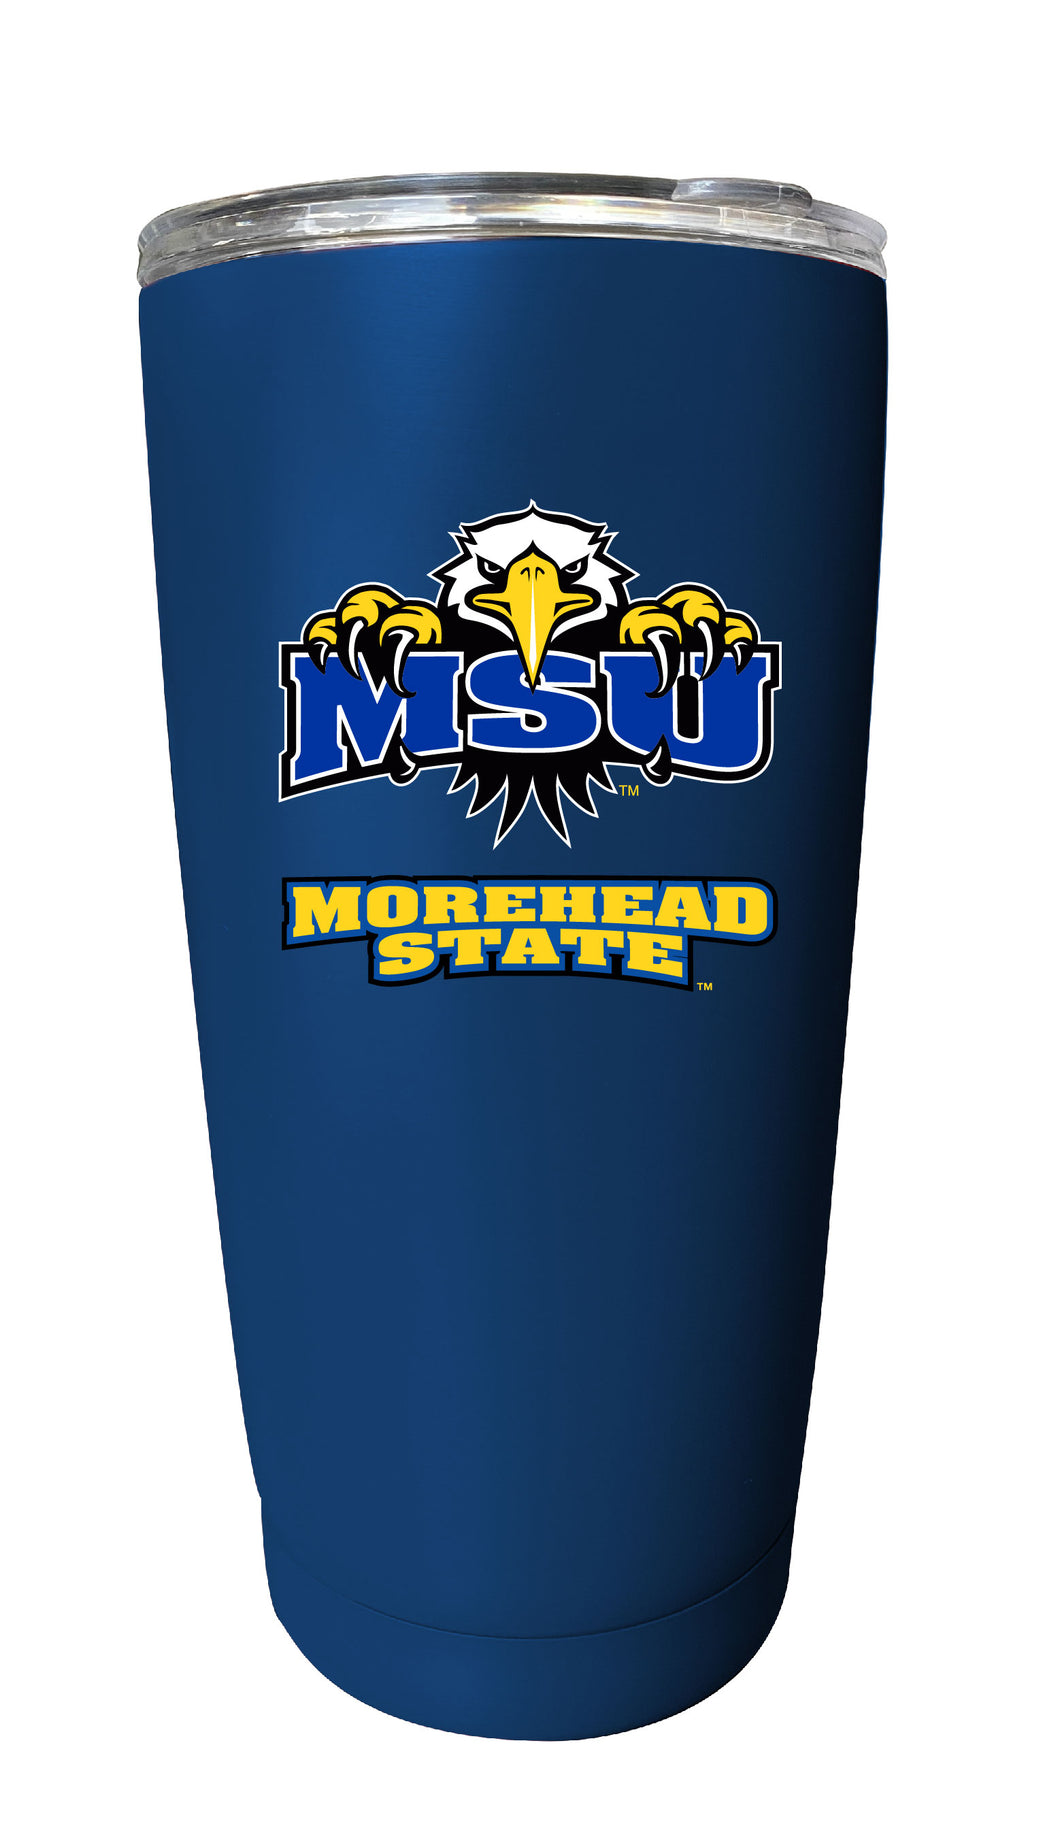 Morehead State University 16 oz Insulated Stainless Steel Tumbler - Choose Your Color.